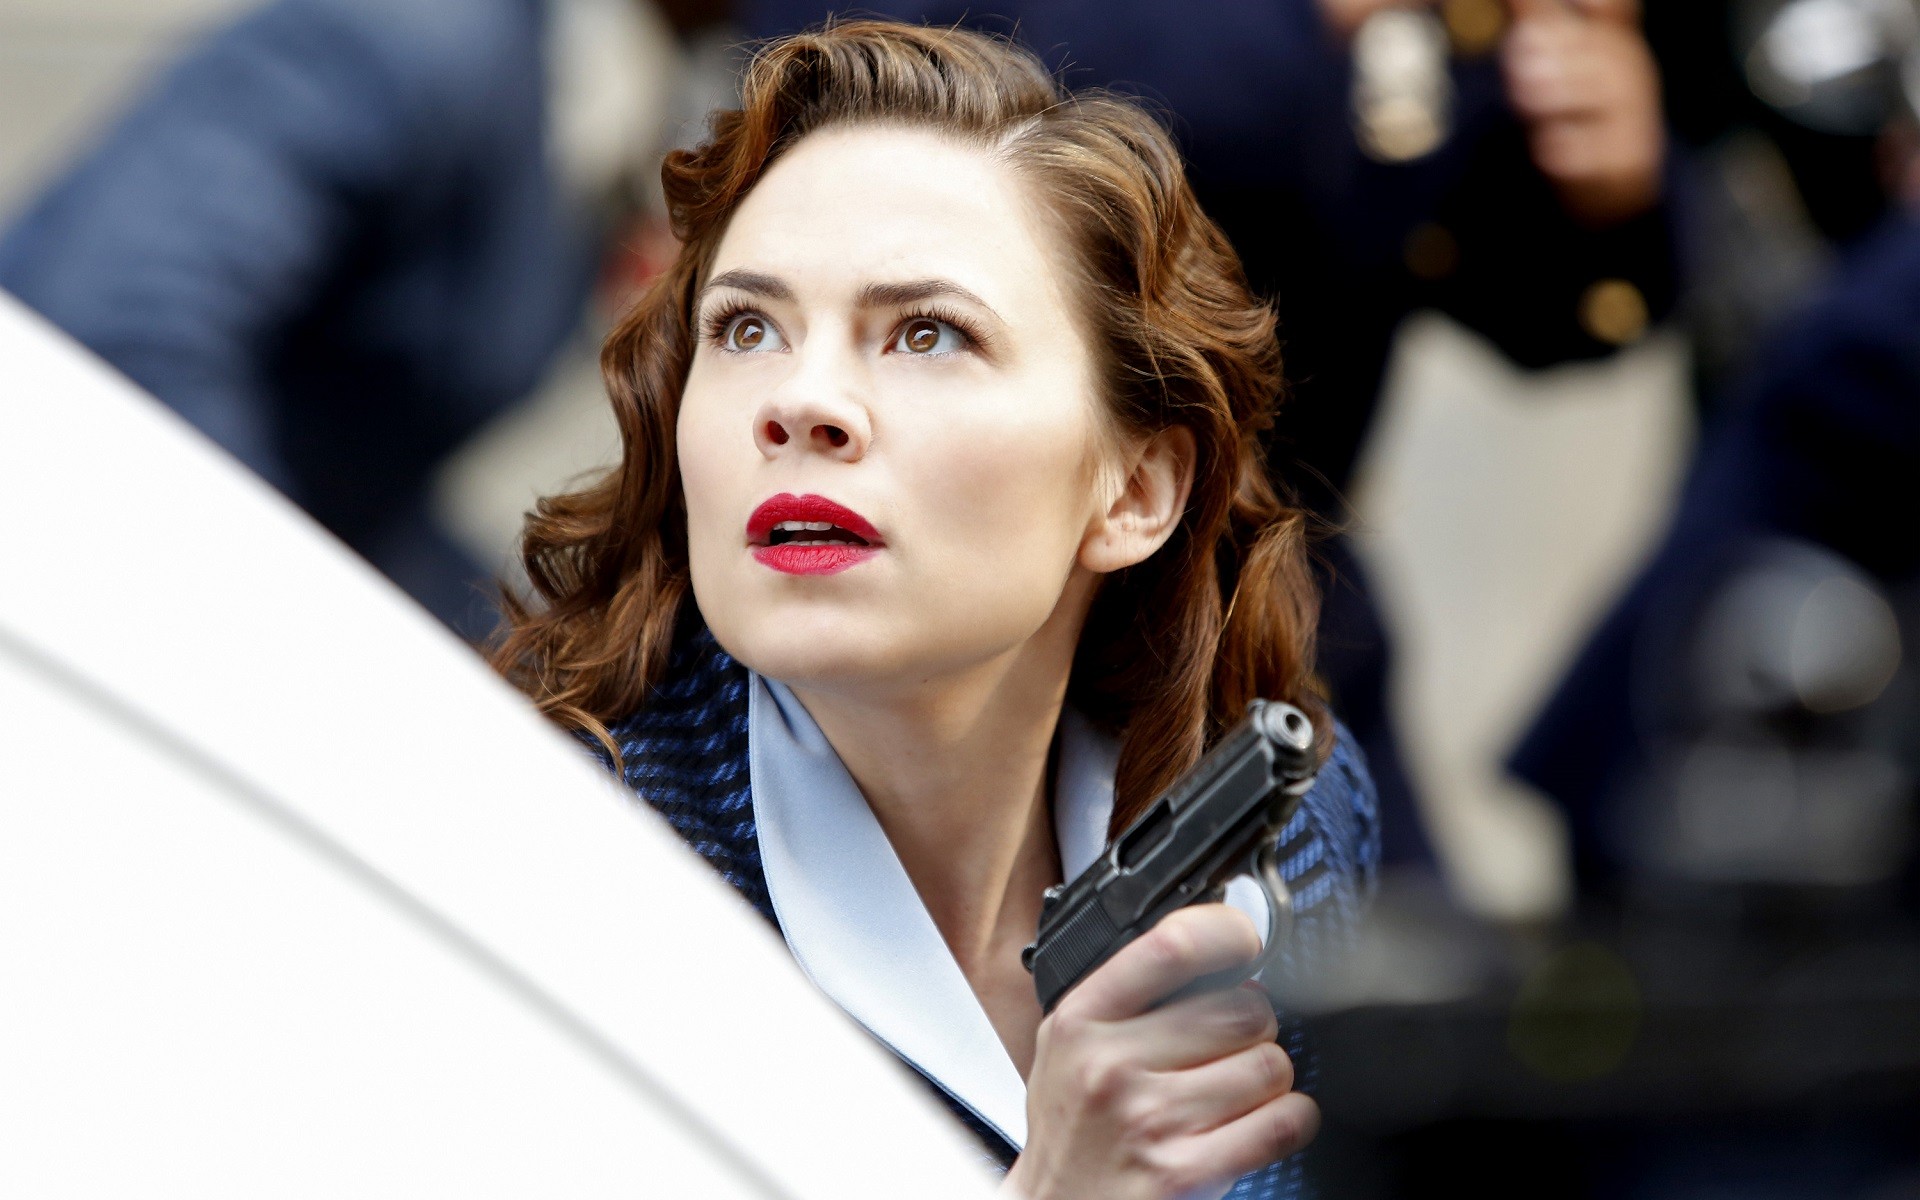 People 1920x1200 Peggy Carter Hayley Atwell women actress red lipstick gun pistol weapon face movies Captain America girls with guns Marvel Cinematic Universe film stills